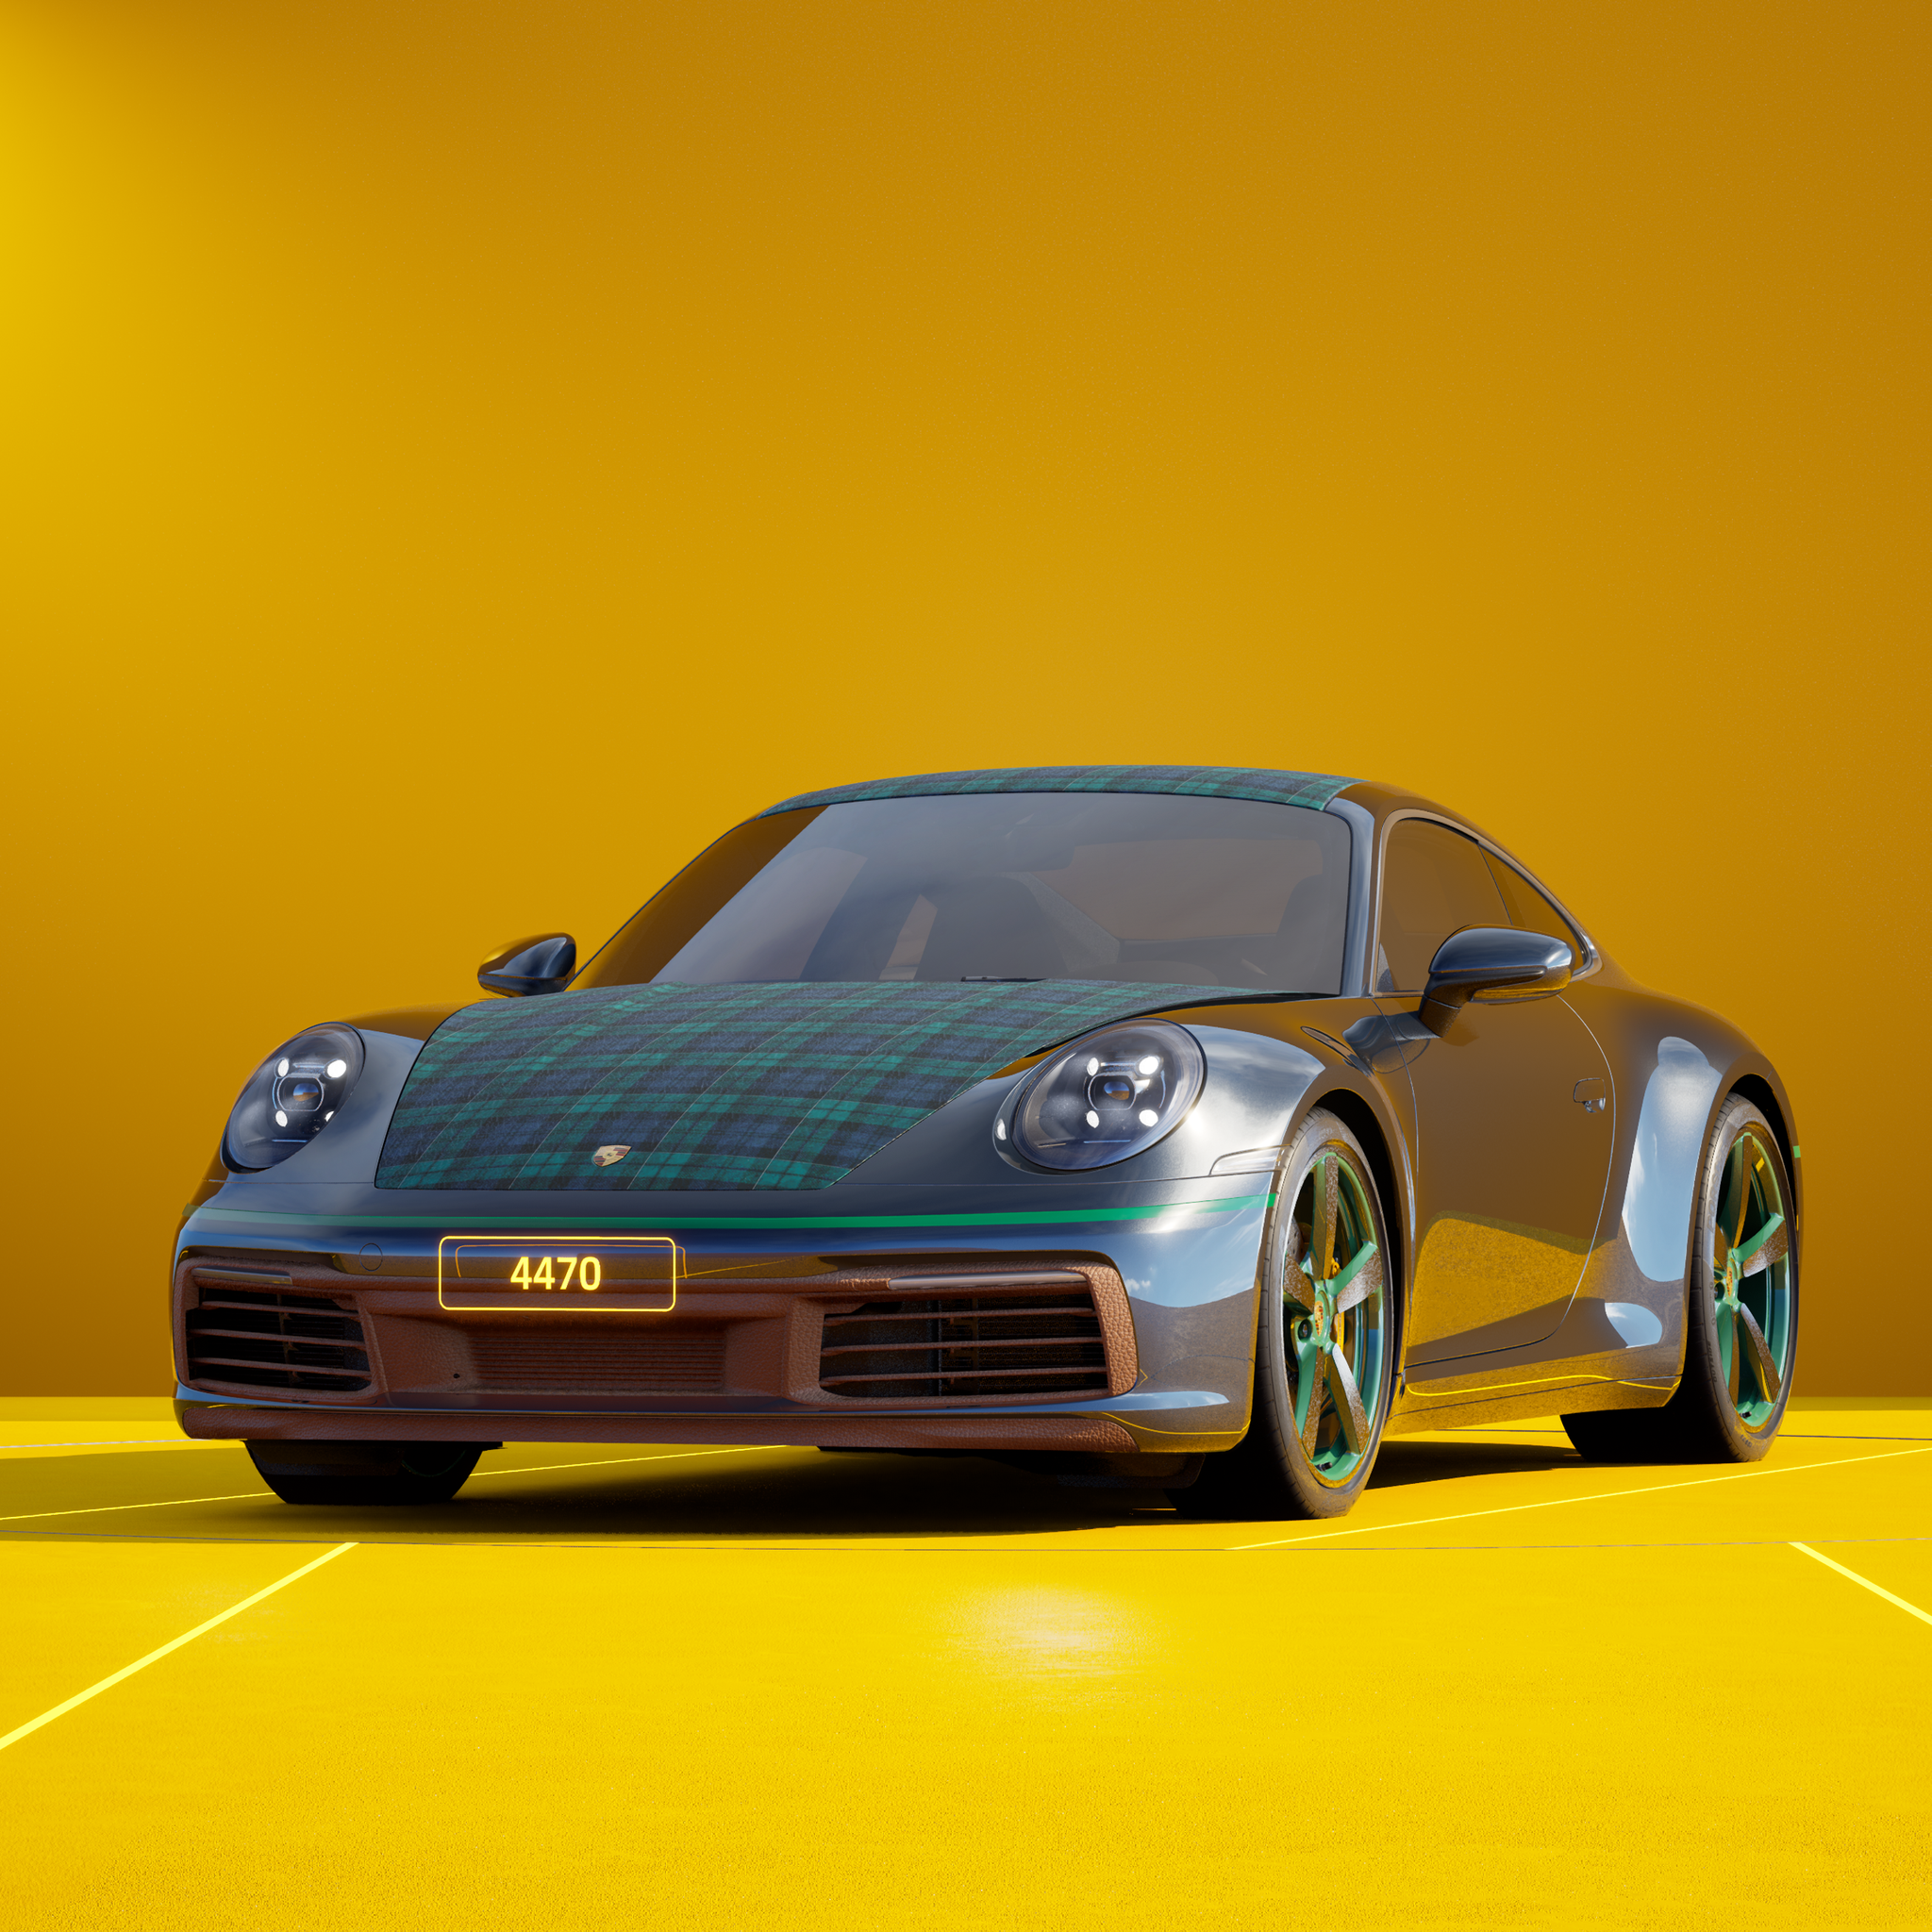 The PORSCHΞ 911 4470 image in phase